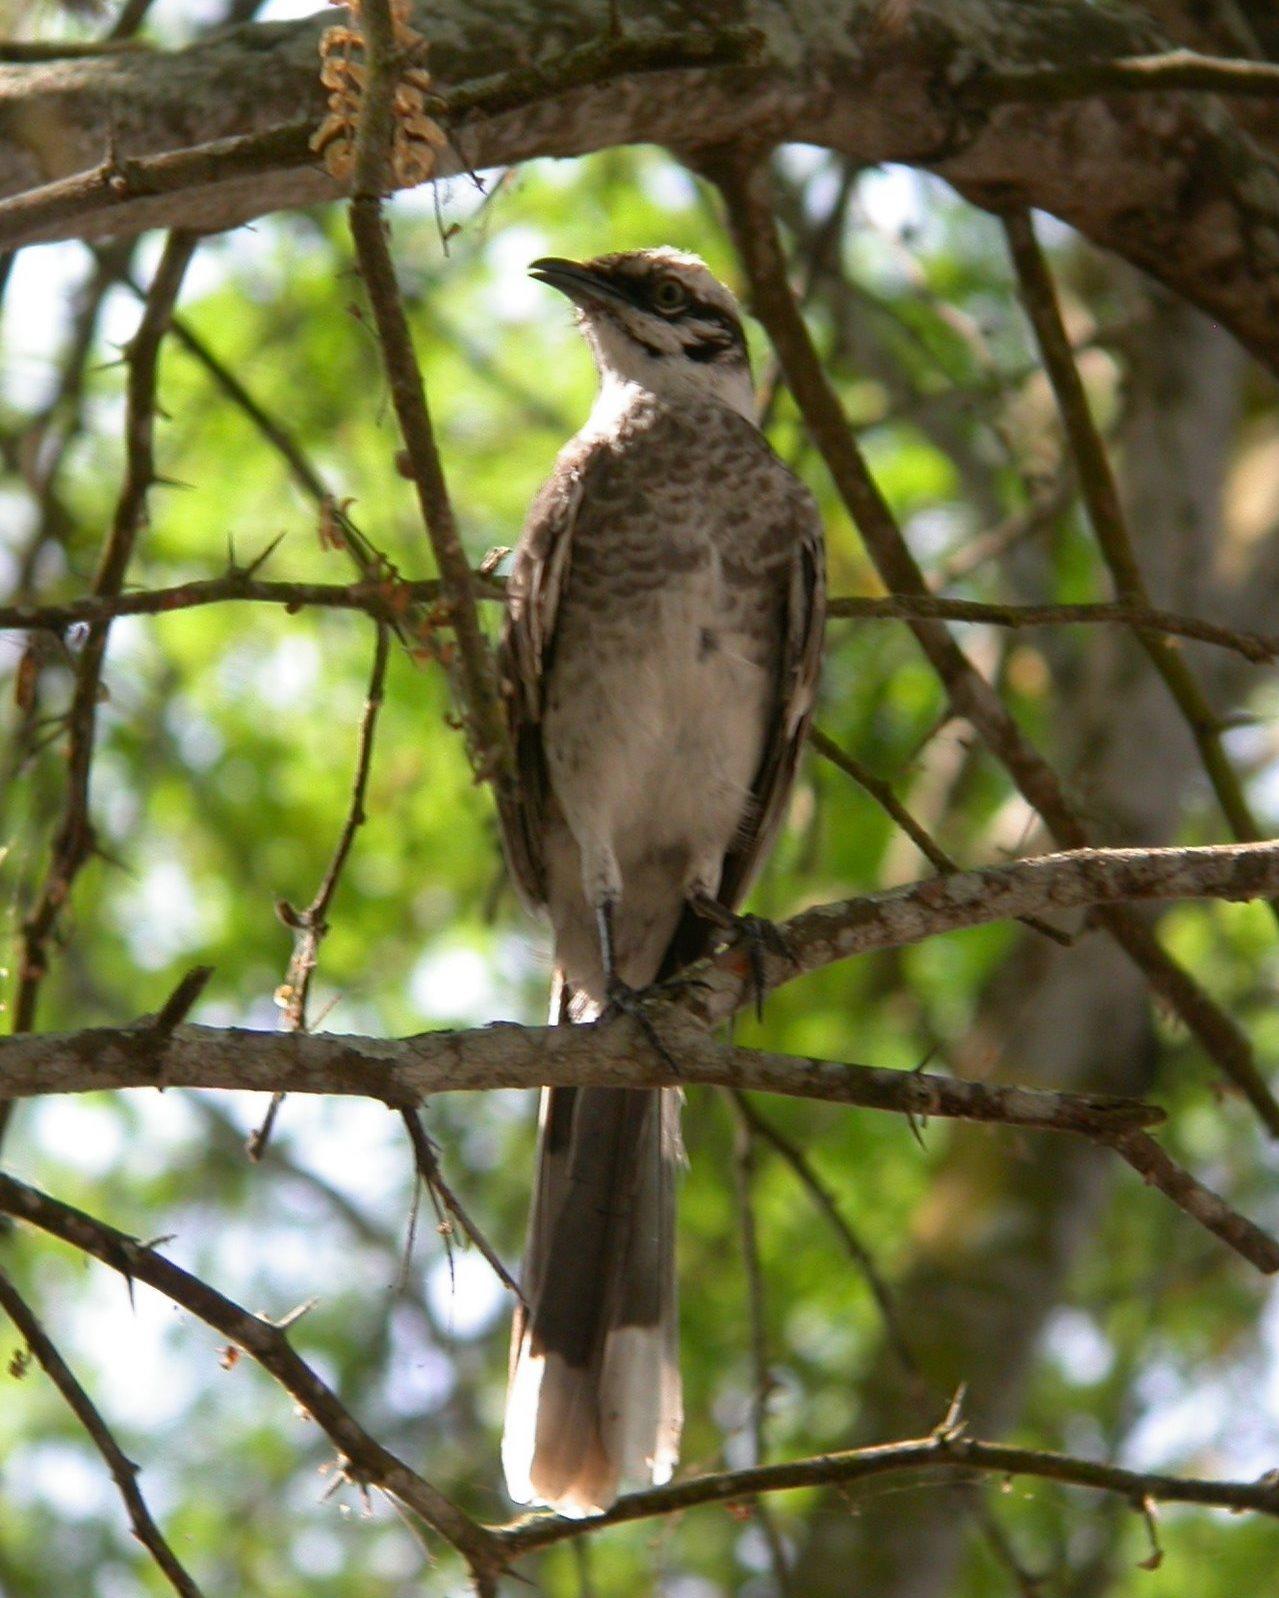 Long-tailed Mockingbird Photo by Sean Fitzgerald